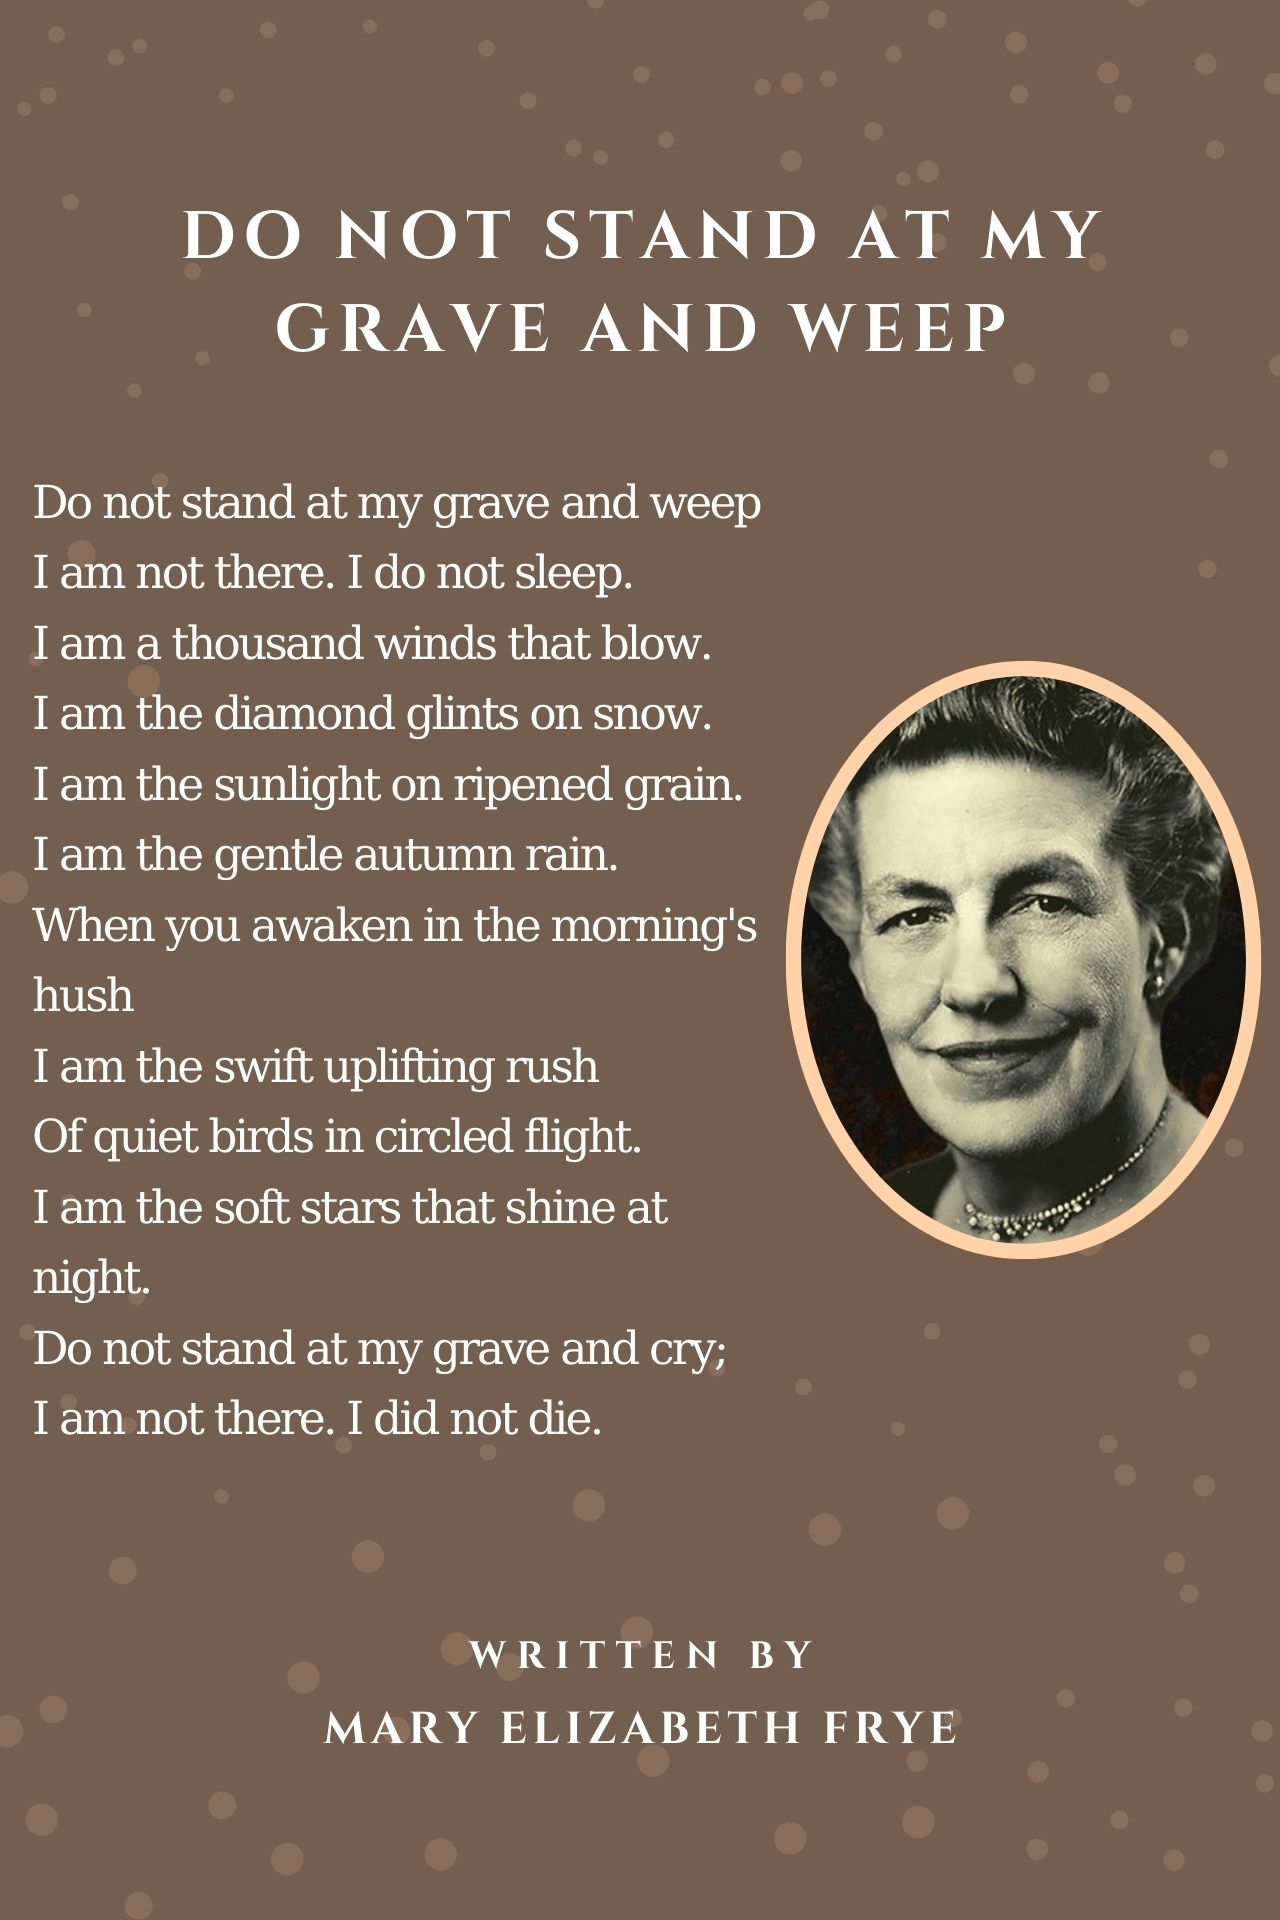 do not stand at my grave and weep poem